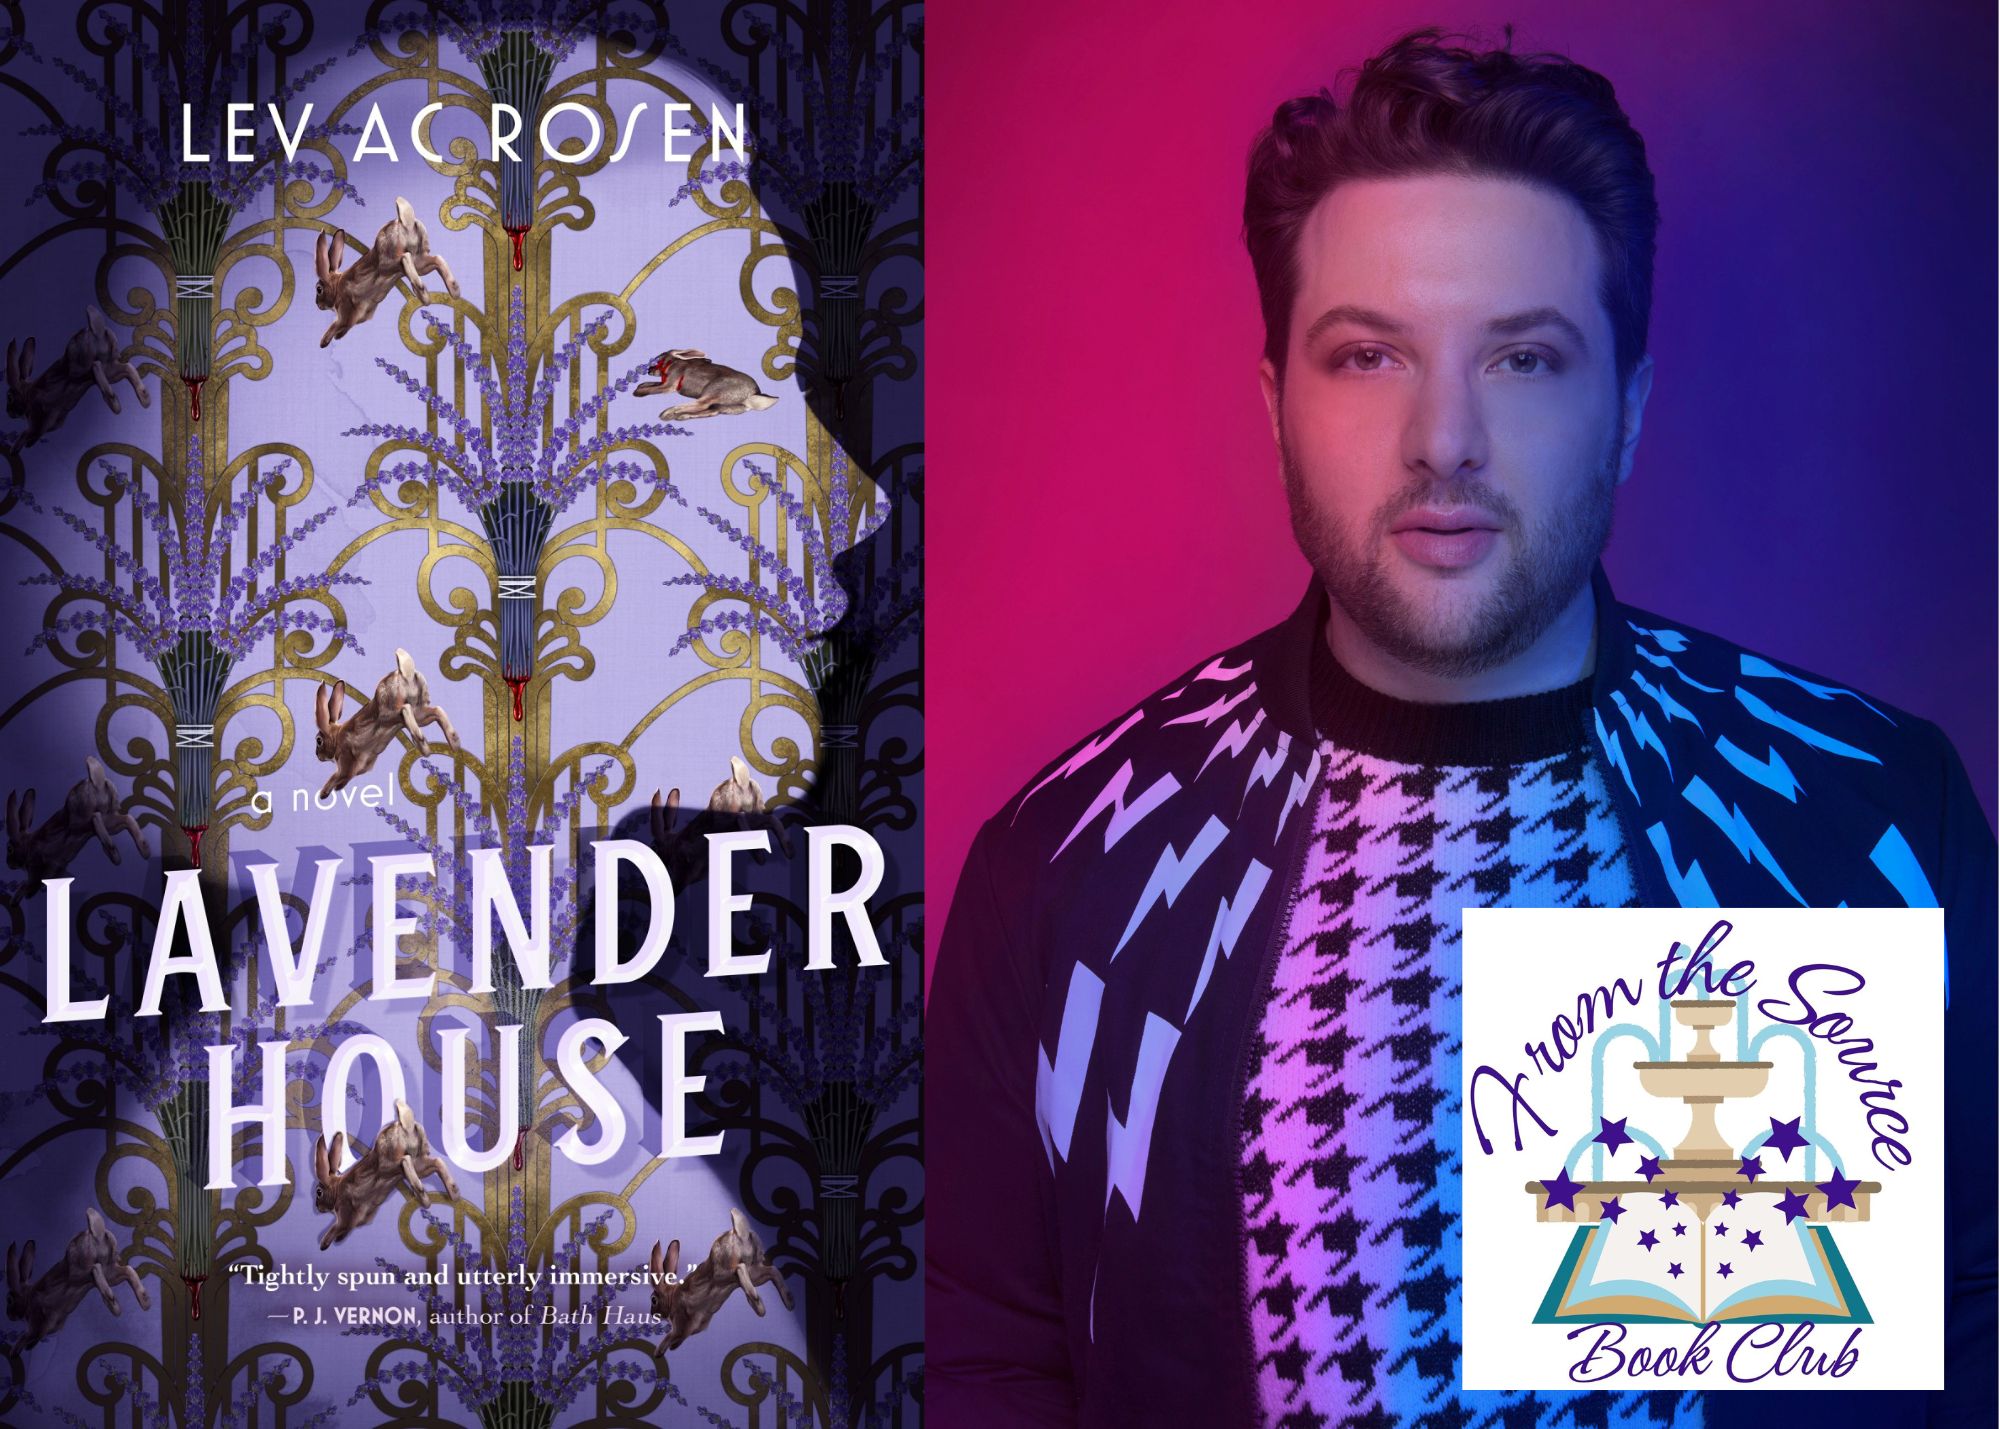 Cover of Lavender House with Lev A.C. Rosen